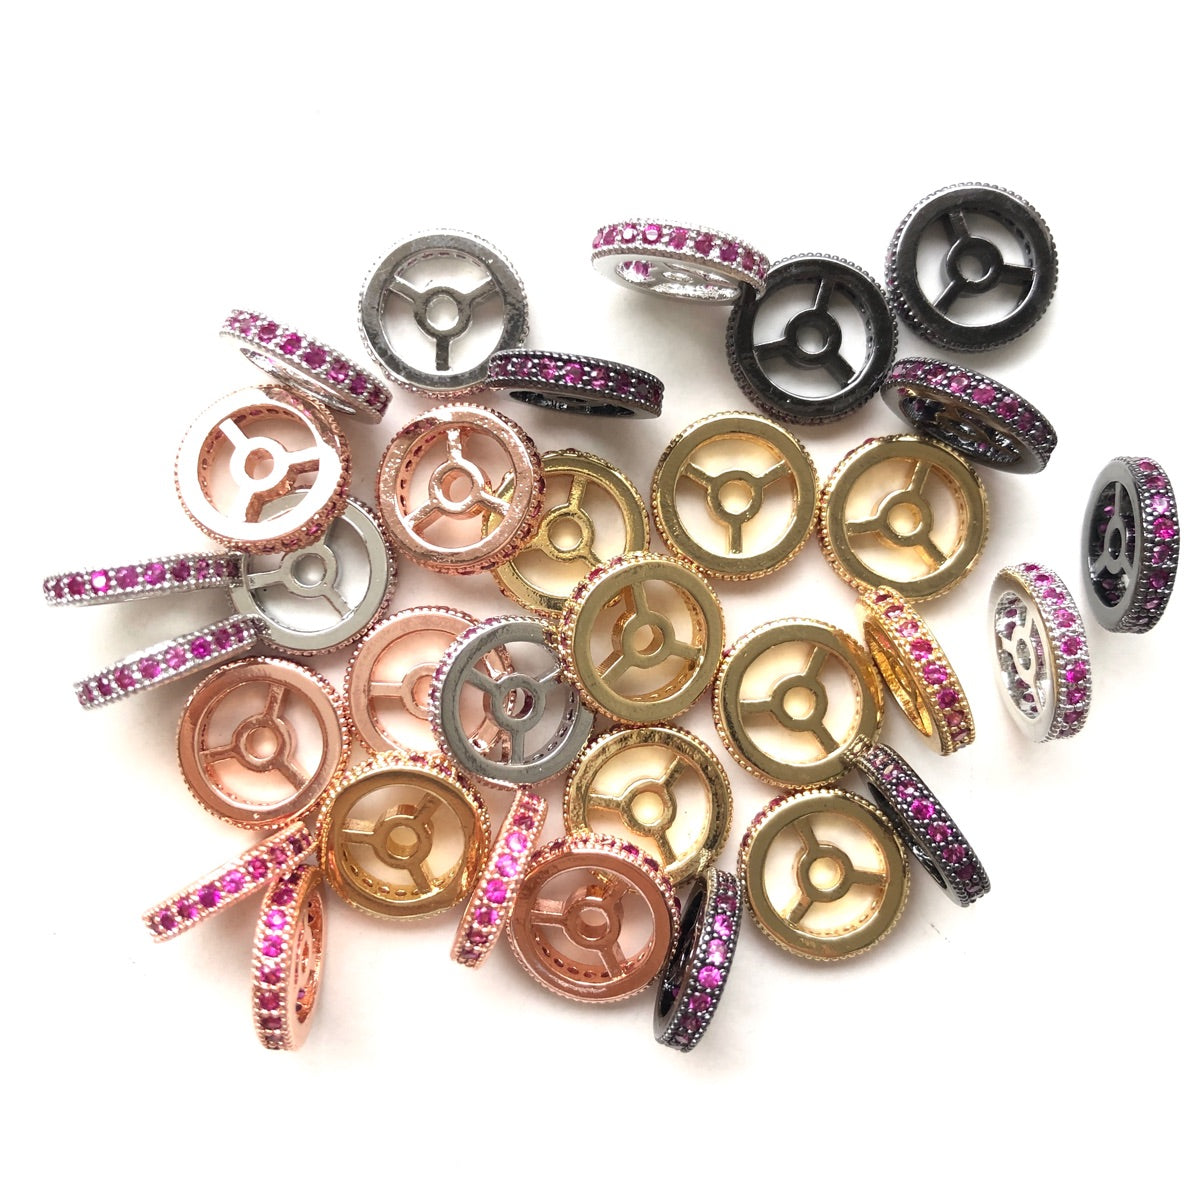 20pcs/lot 9.6/12mm Fuchsia CZ Paved Wheel Rondelle Spacers Mix Colors CZ Paved Spacers New Spacers Arrivals Rondelle Beads Charms Beads Beyond